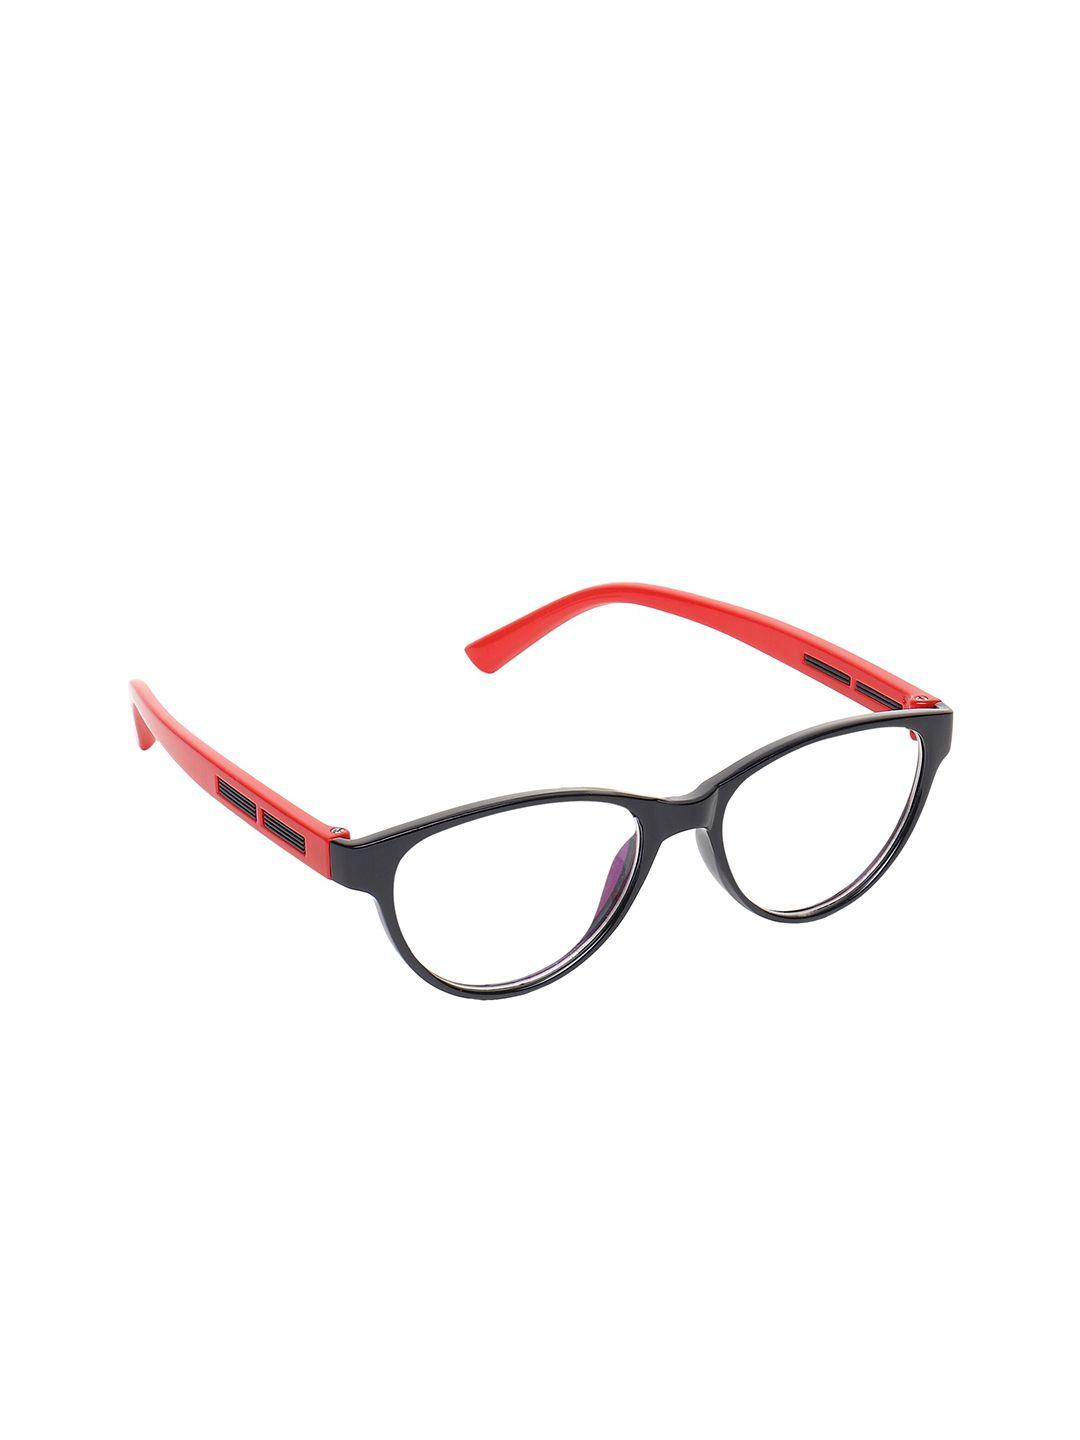 scaglia unisex clear lens & red cateye sunglasses with uv protected lens